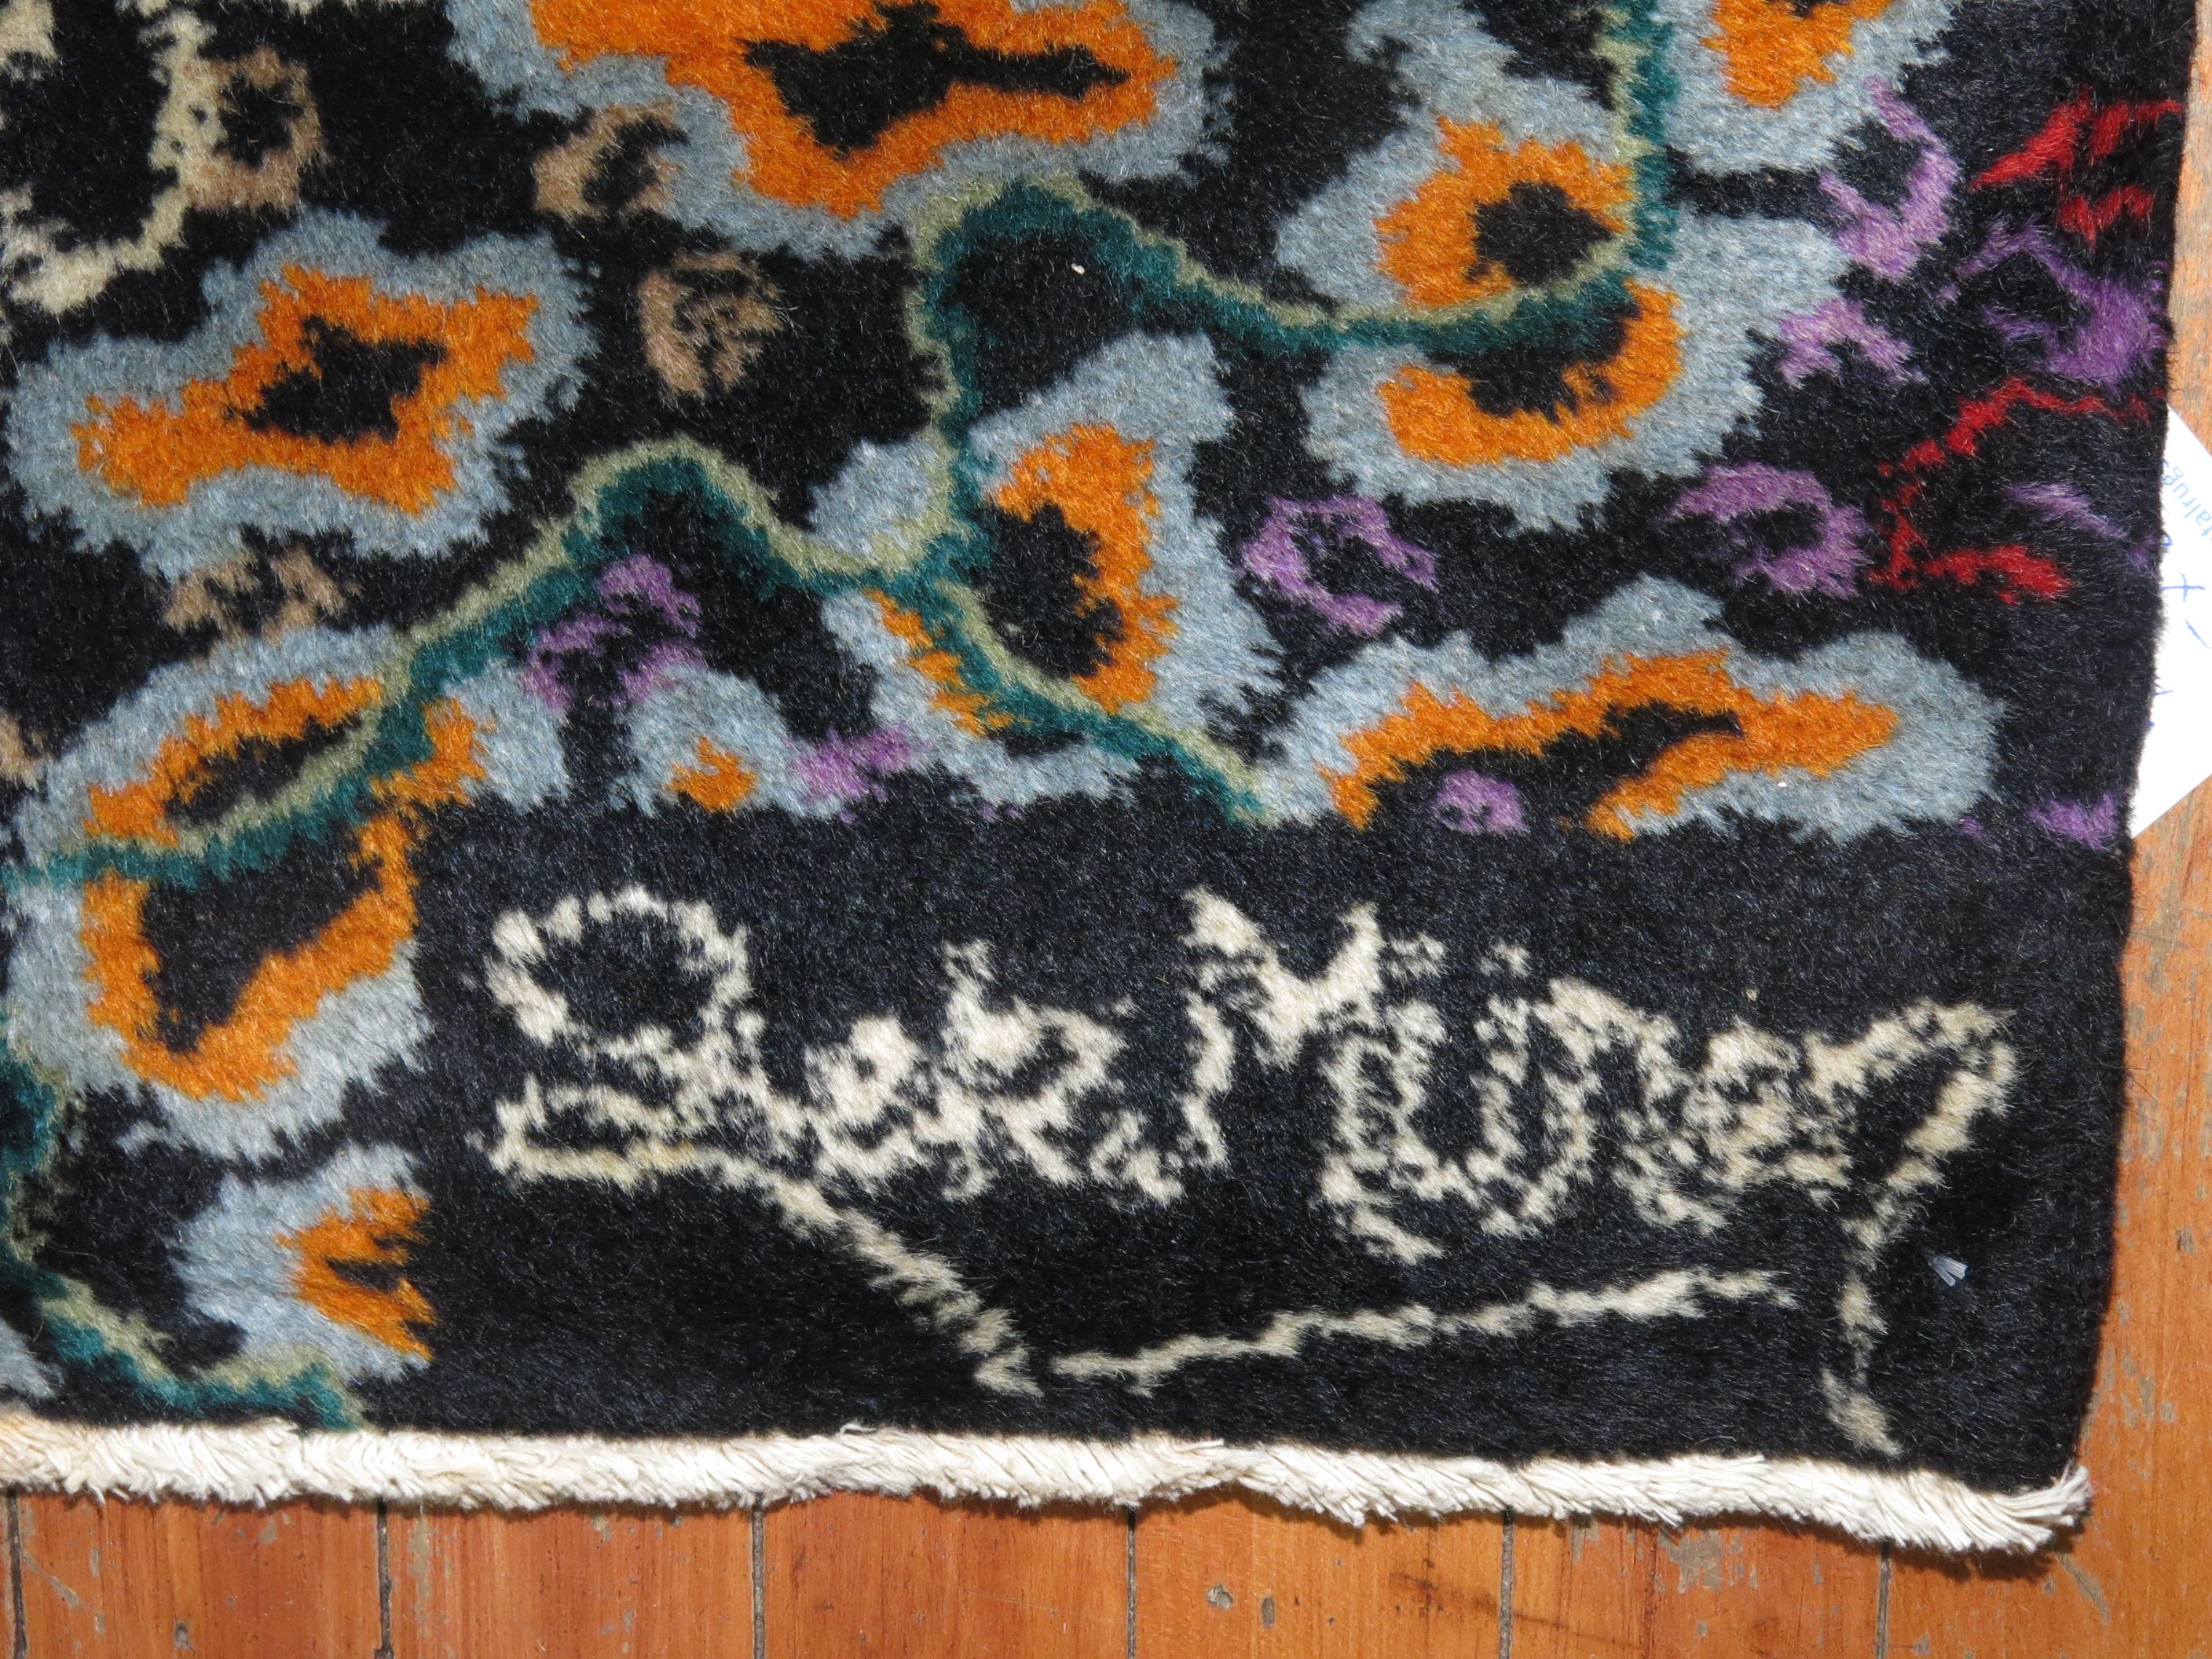 Turkish Zeki Muren rug with a lovely all-over border less design with zeki muren signature on 1 end and Turkish quote 